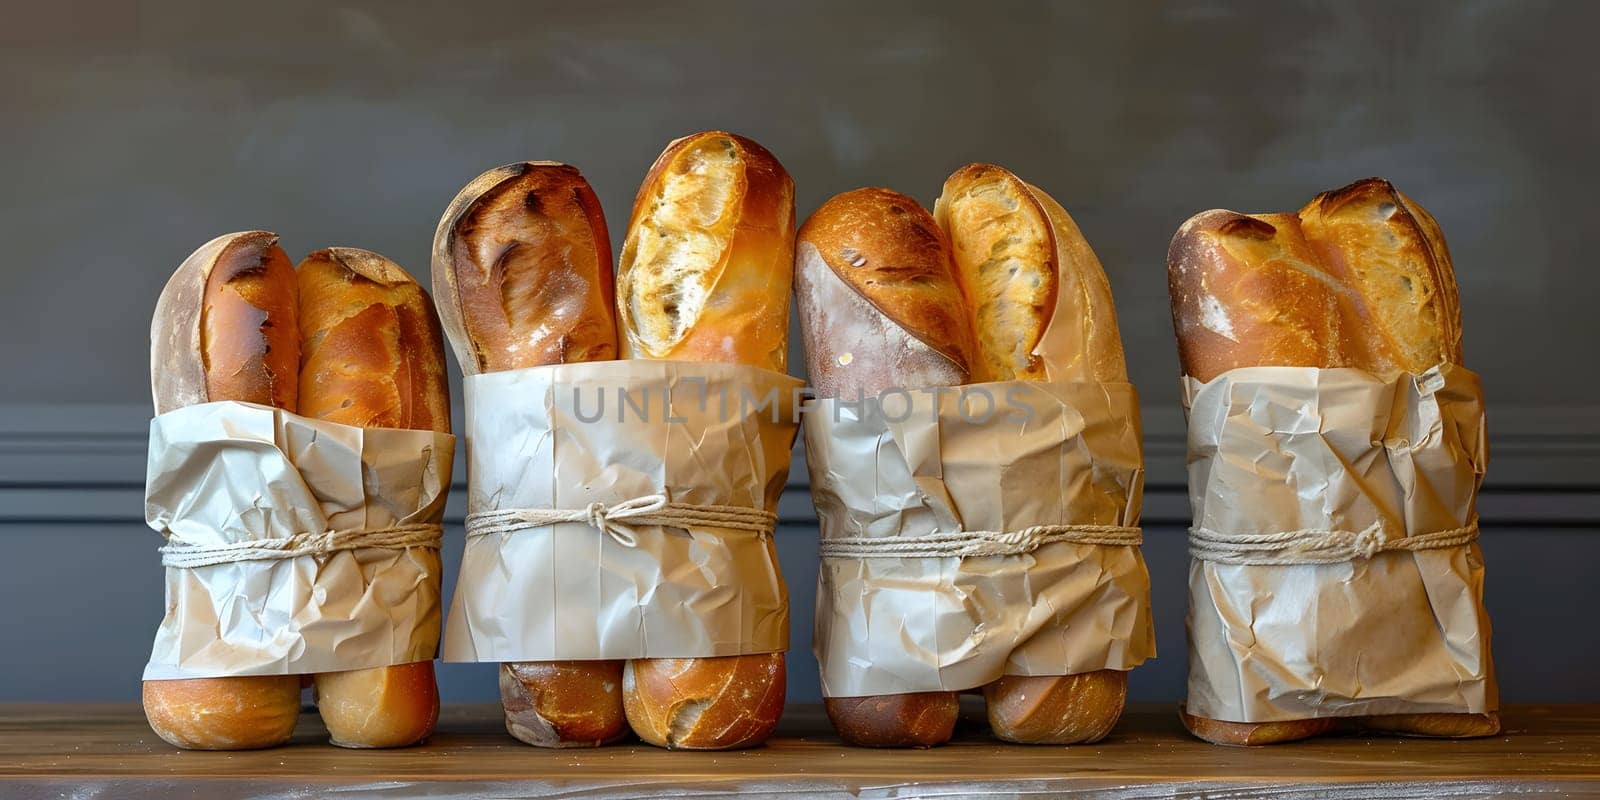 Four bread loaves packaged in brown paper, a tasty treat for any occasion by Nadtochiy